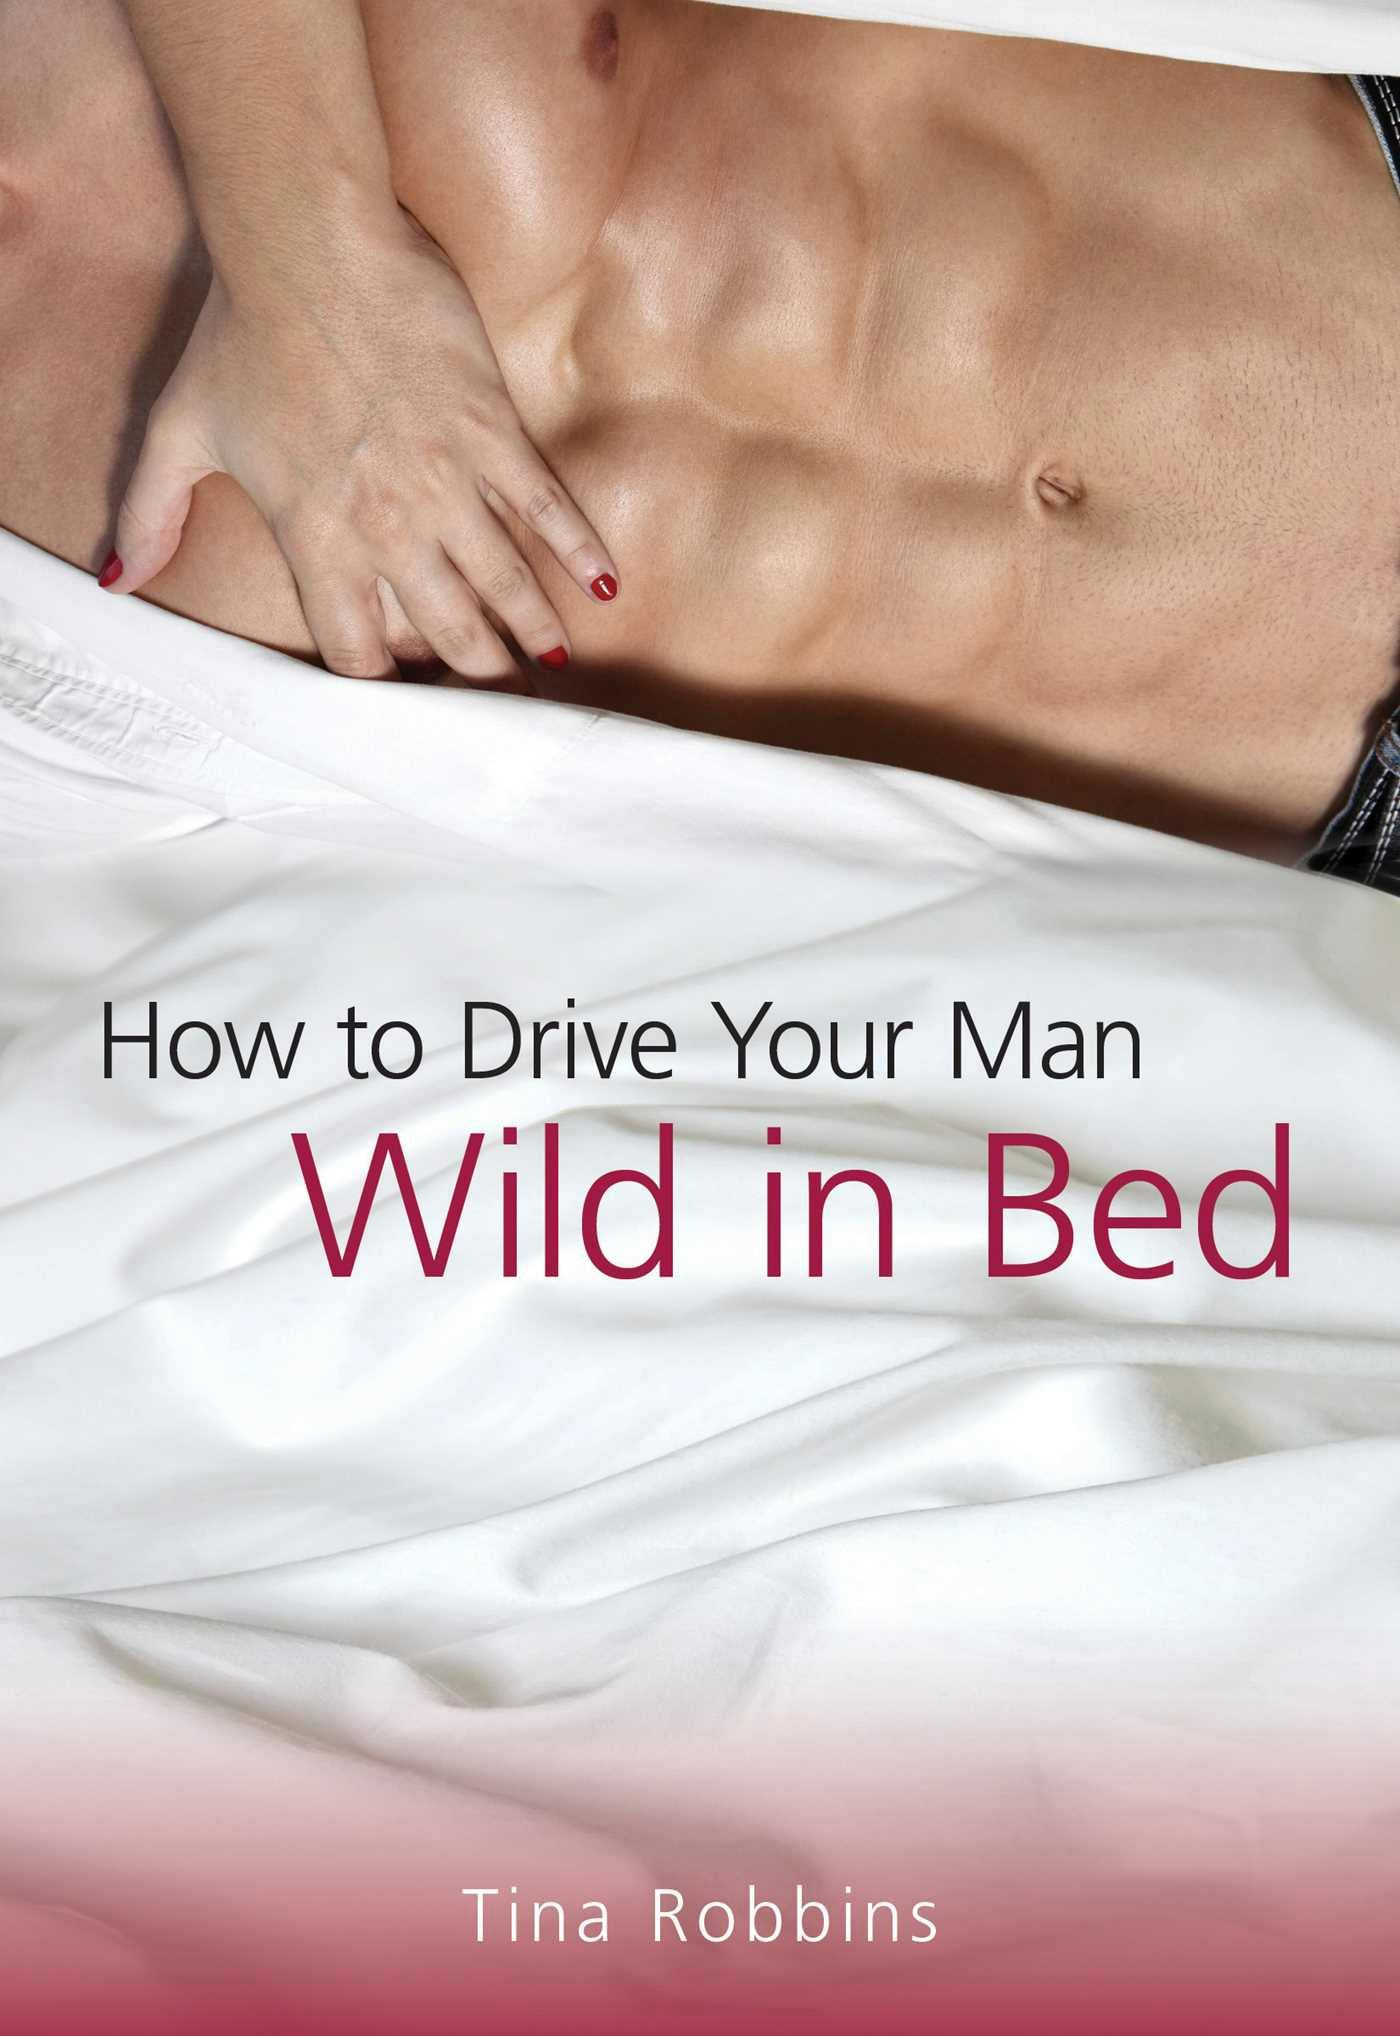 How to Drive Your Man Wild in Bed - Tina Robbins